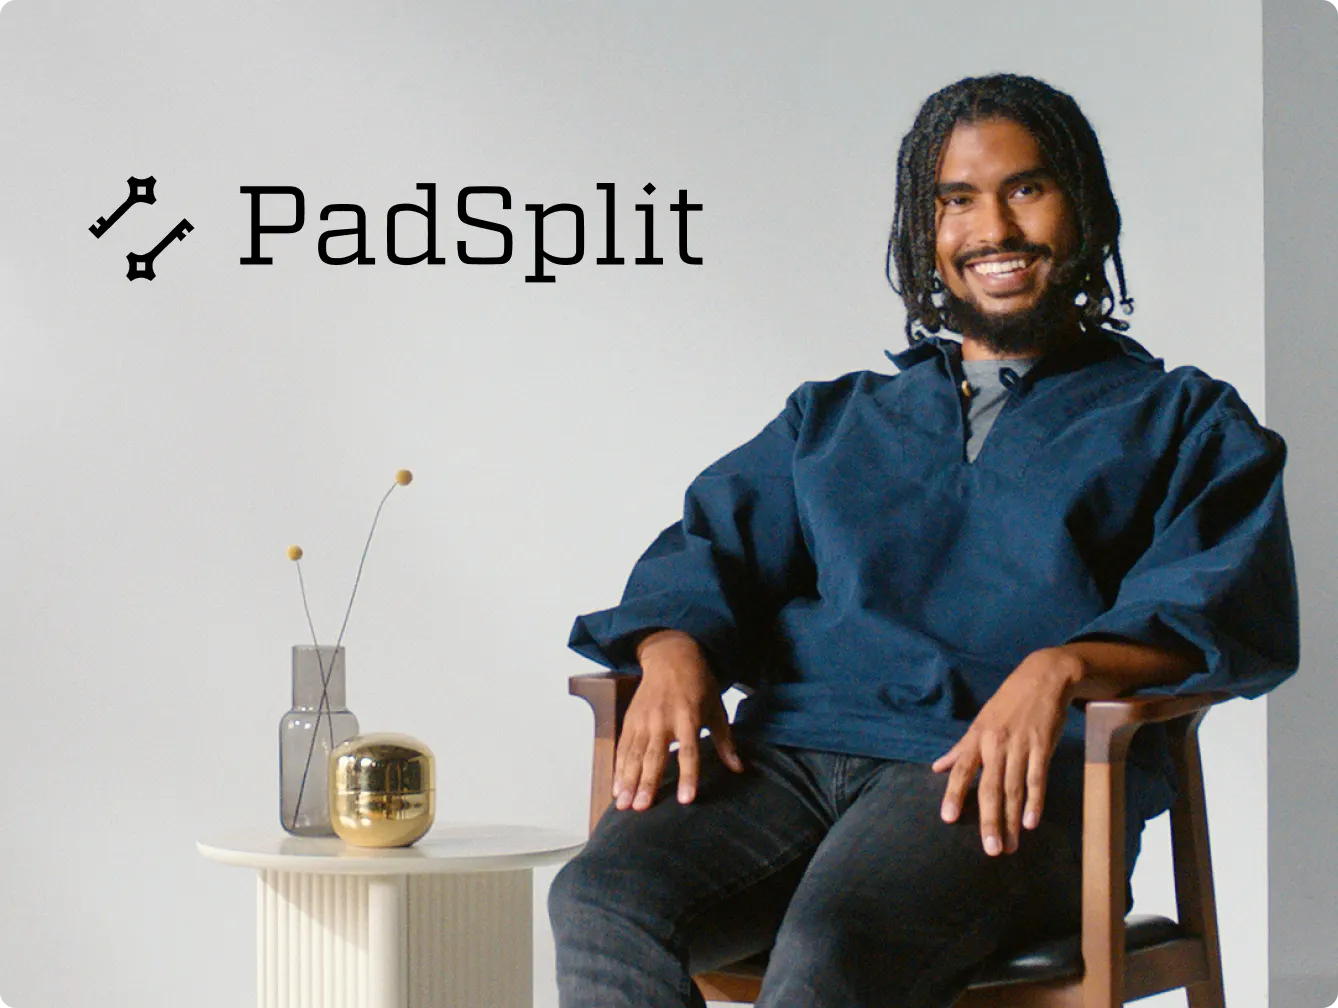 PadSplit advertisement featuring a smiling man with curly hair and a beard, wearing a dark blue shirt, sitting on a chair. Next to him is a small table with a vase and a decorative item. The PadSplit logo is prominently displayed at the top left of the image on a light gray background.